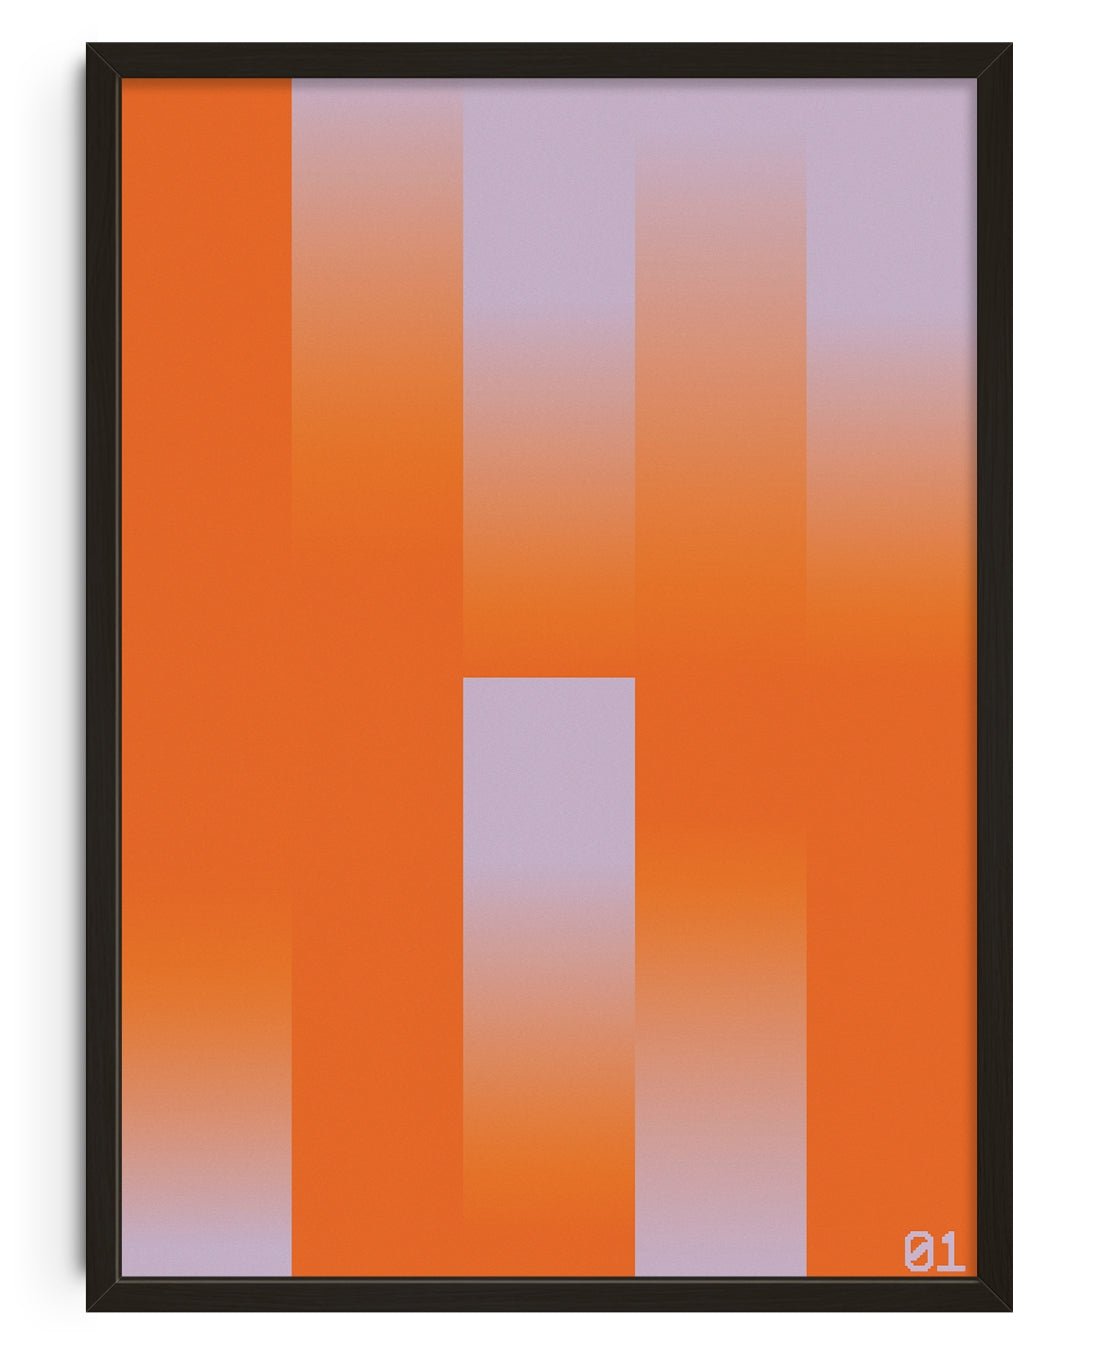 11.7x16.5" (A3) Grade 01 - UNFRAMED contemporary wall art print by Adam Foster - sold by DROOL